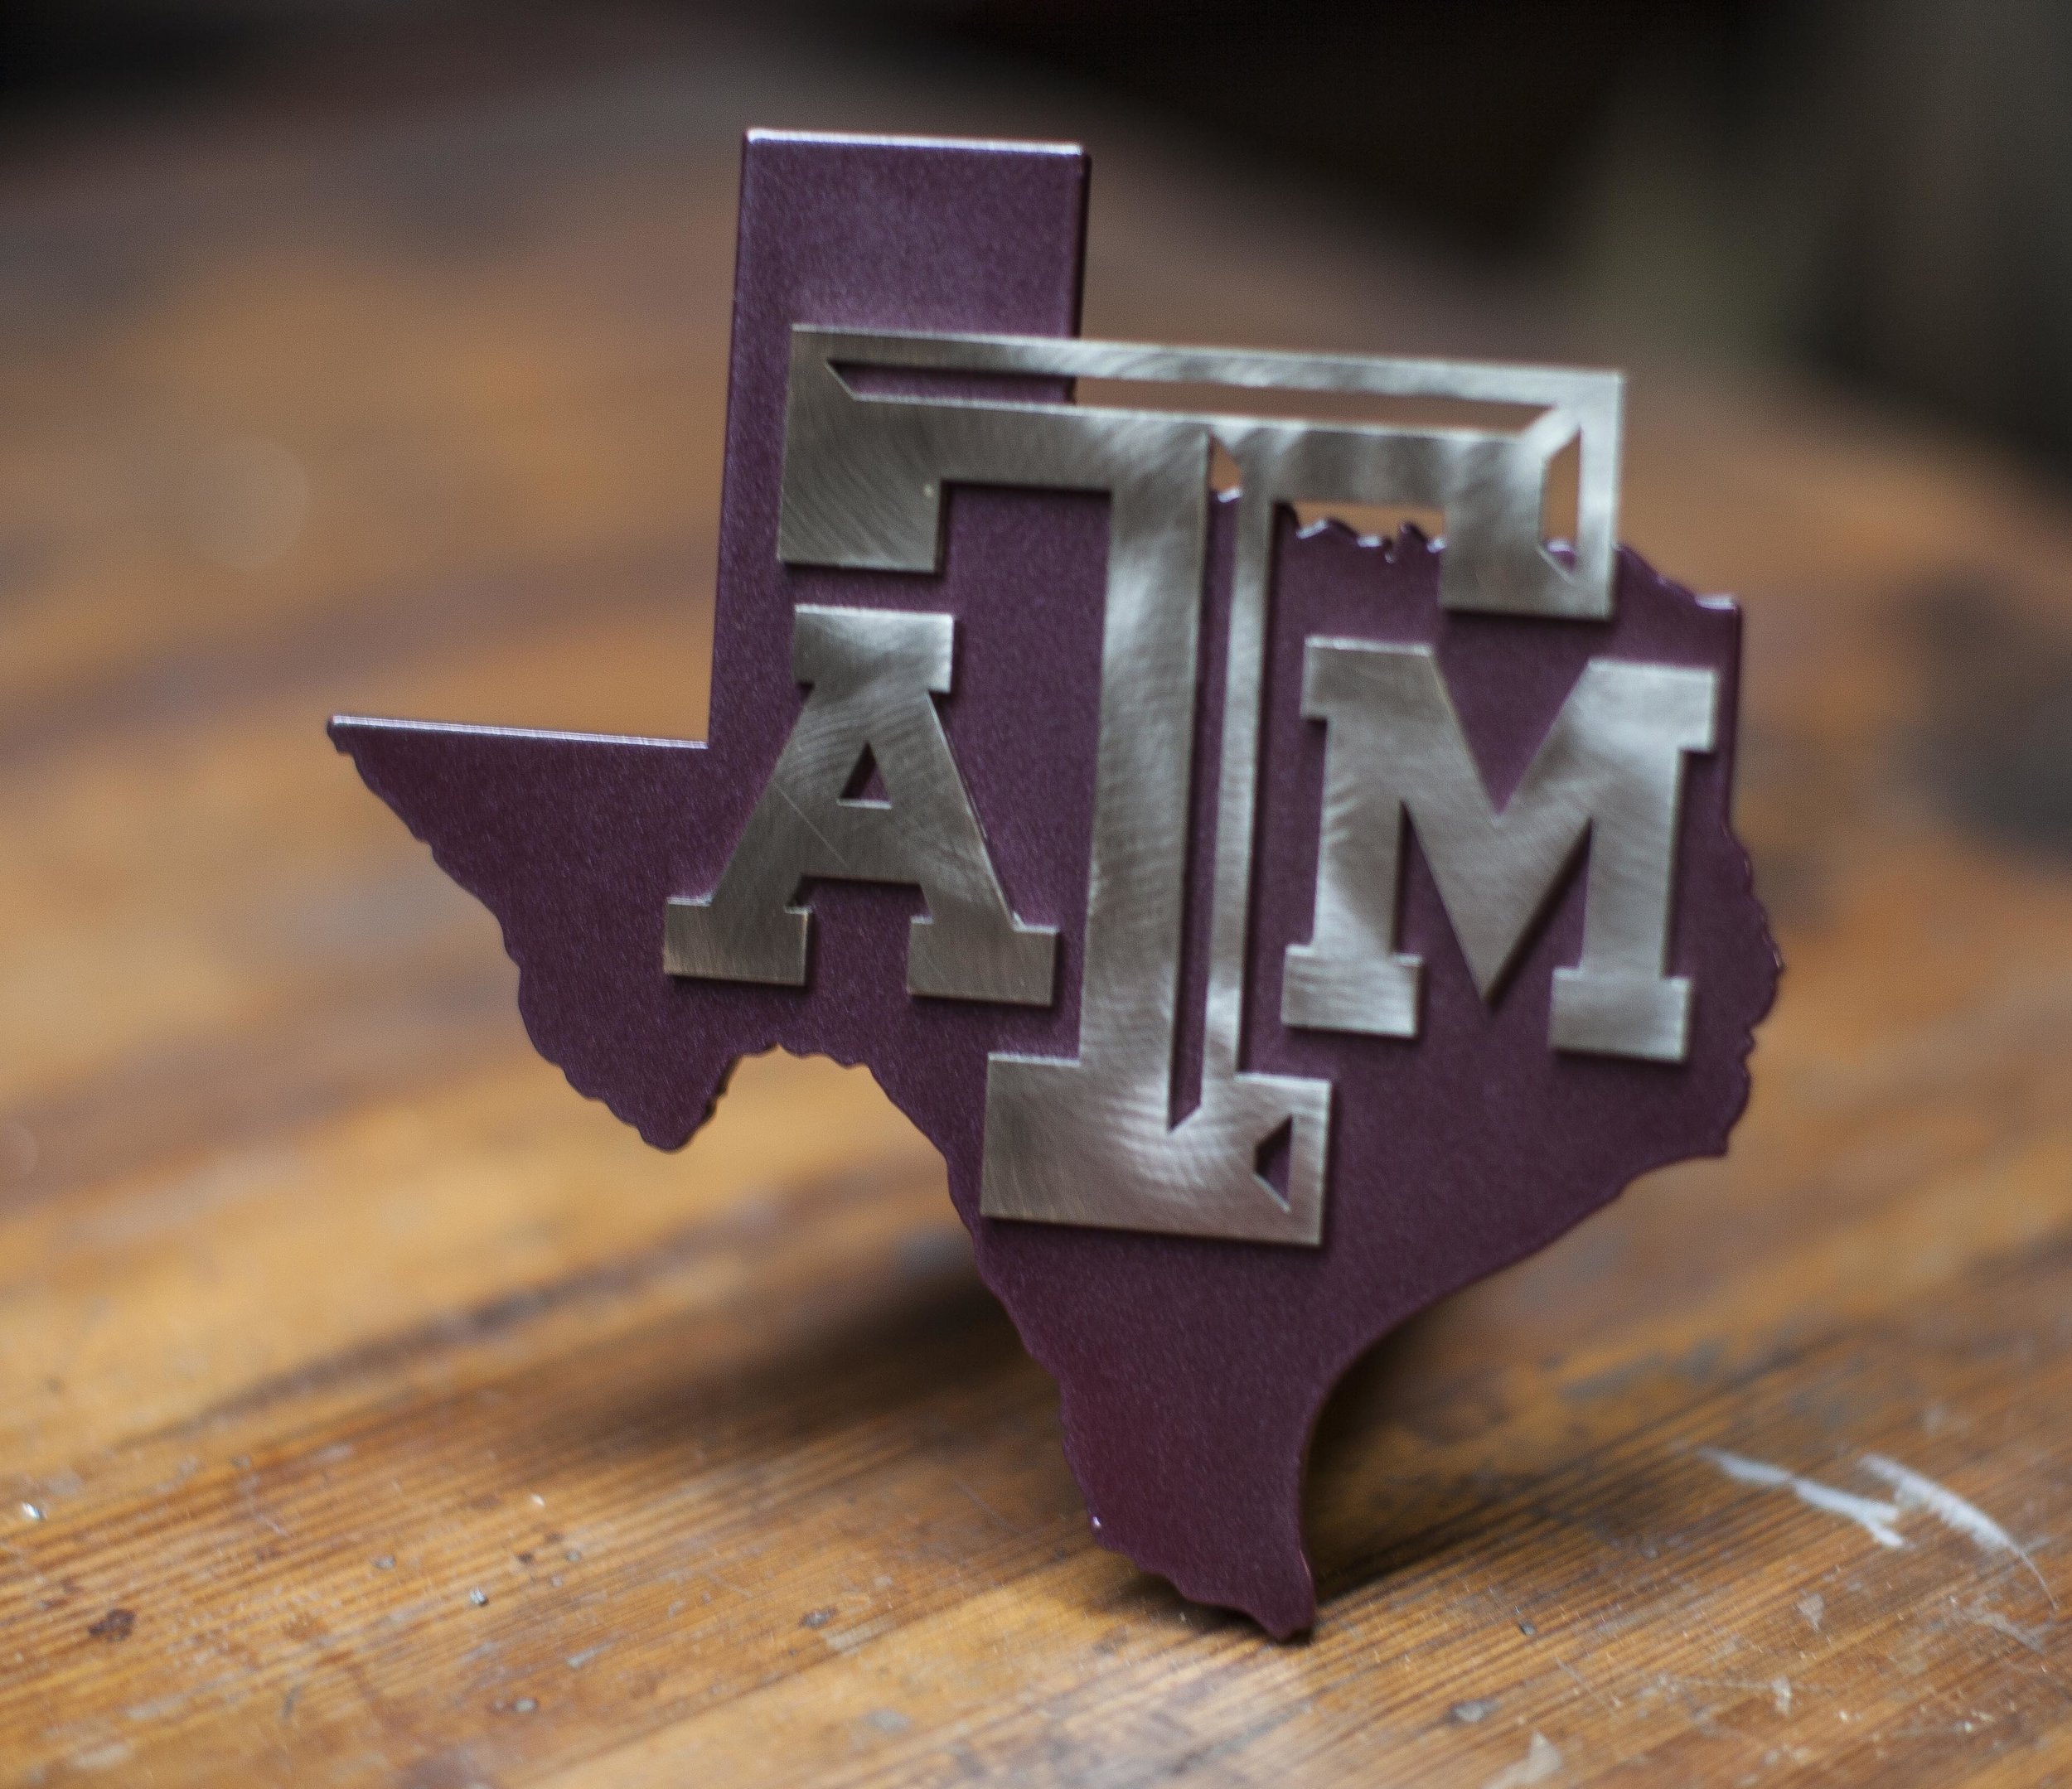 Texas A&M University Aggies Black with Chrome “ATM” State Shape Emblem NCAA College Sports Trailer Hitch Cover Fits 2 Inch Auto Car Truck Receiver